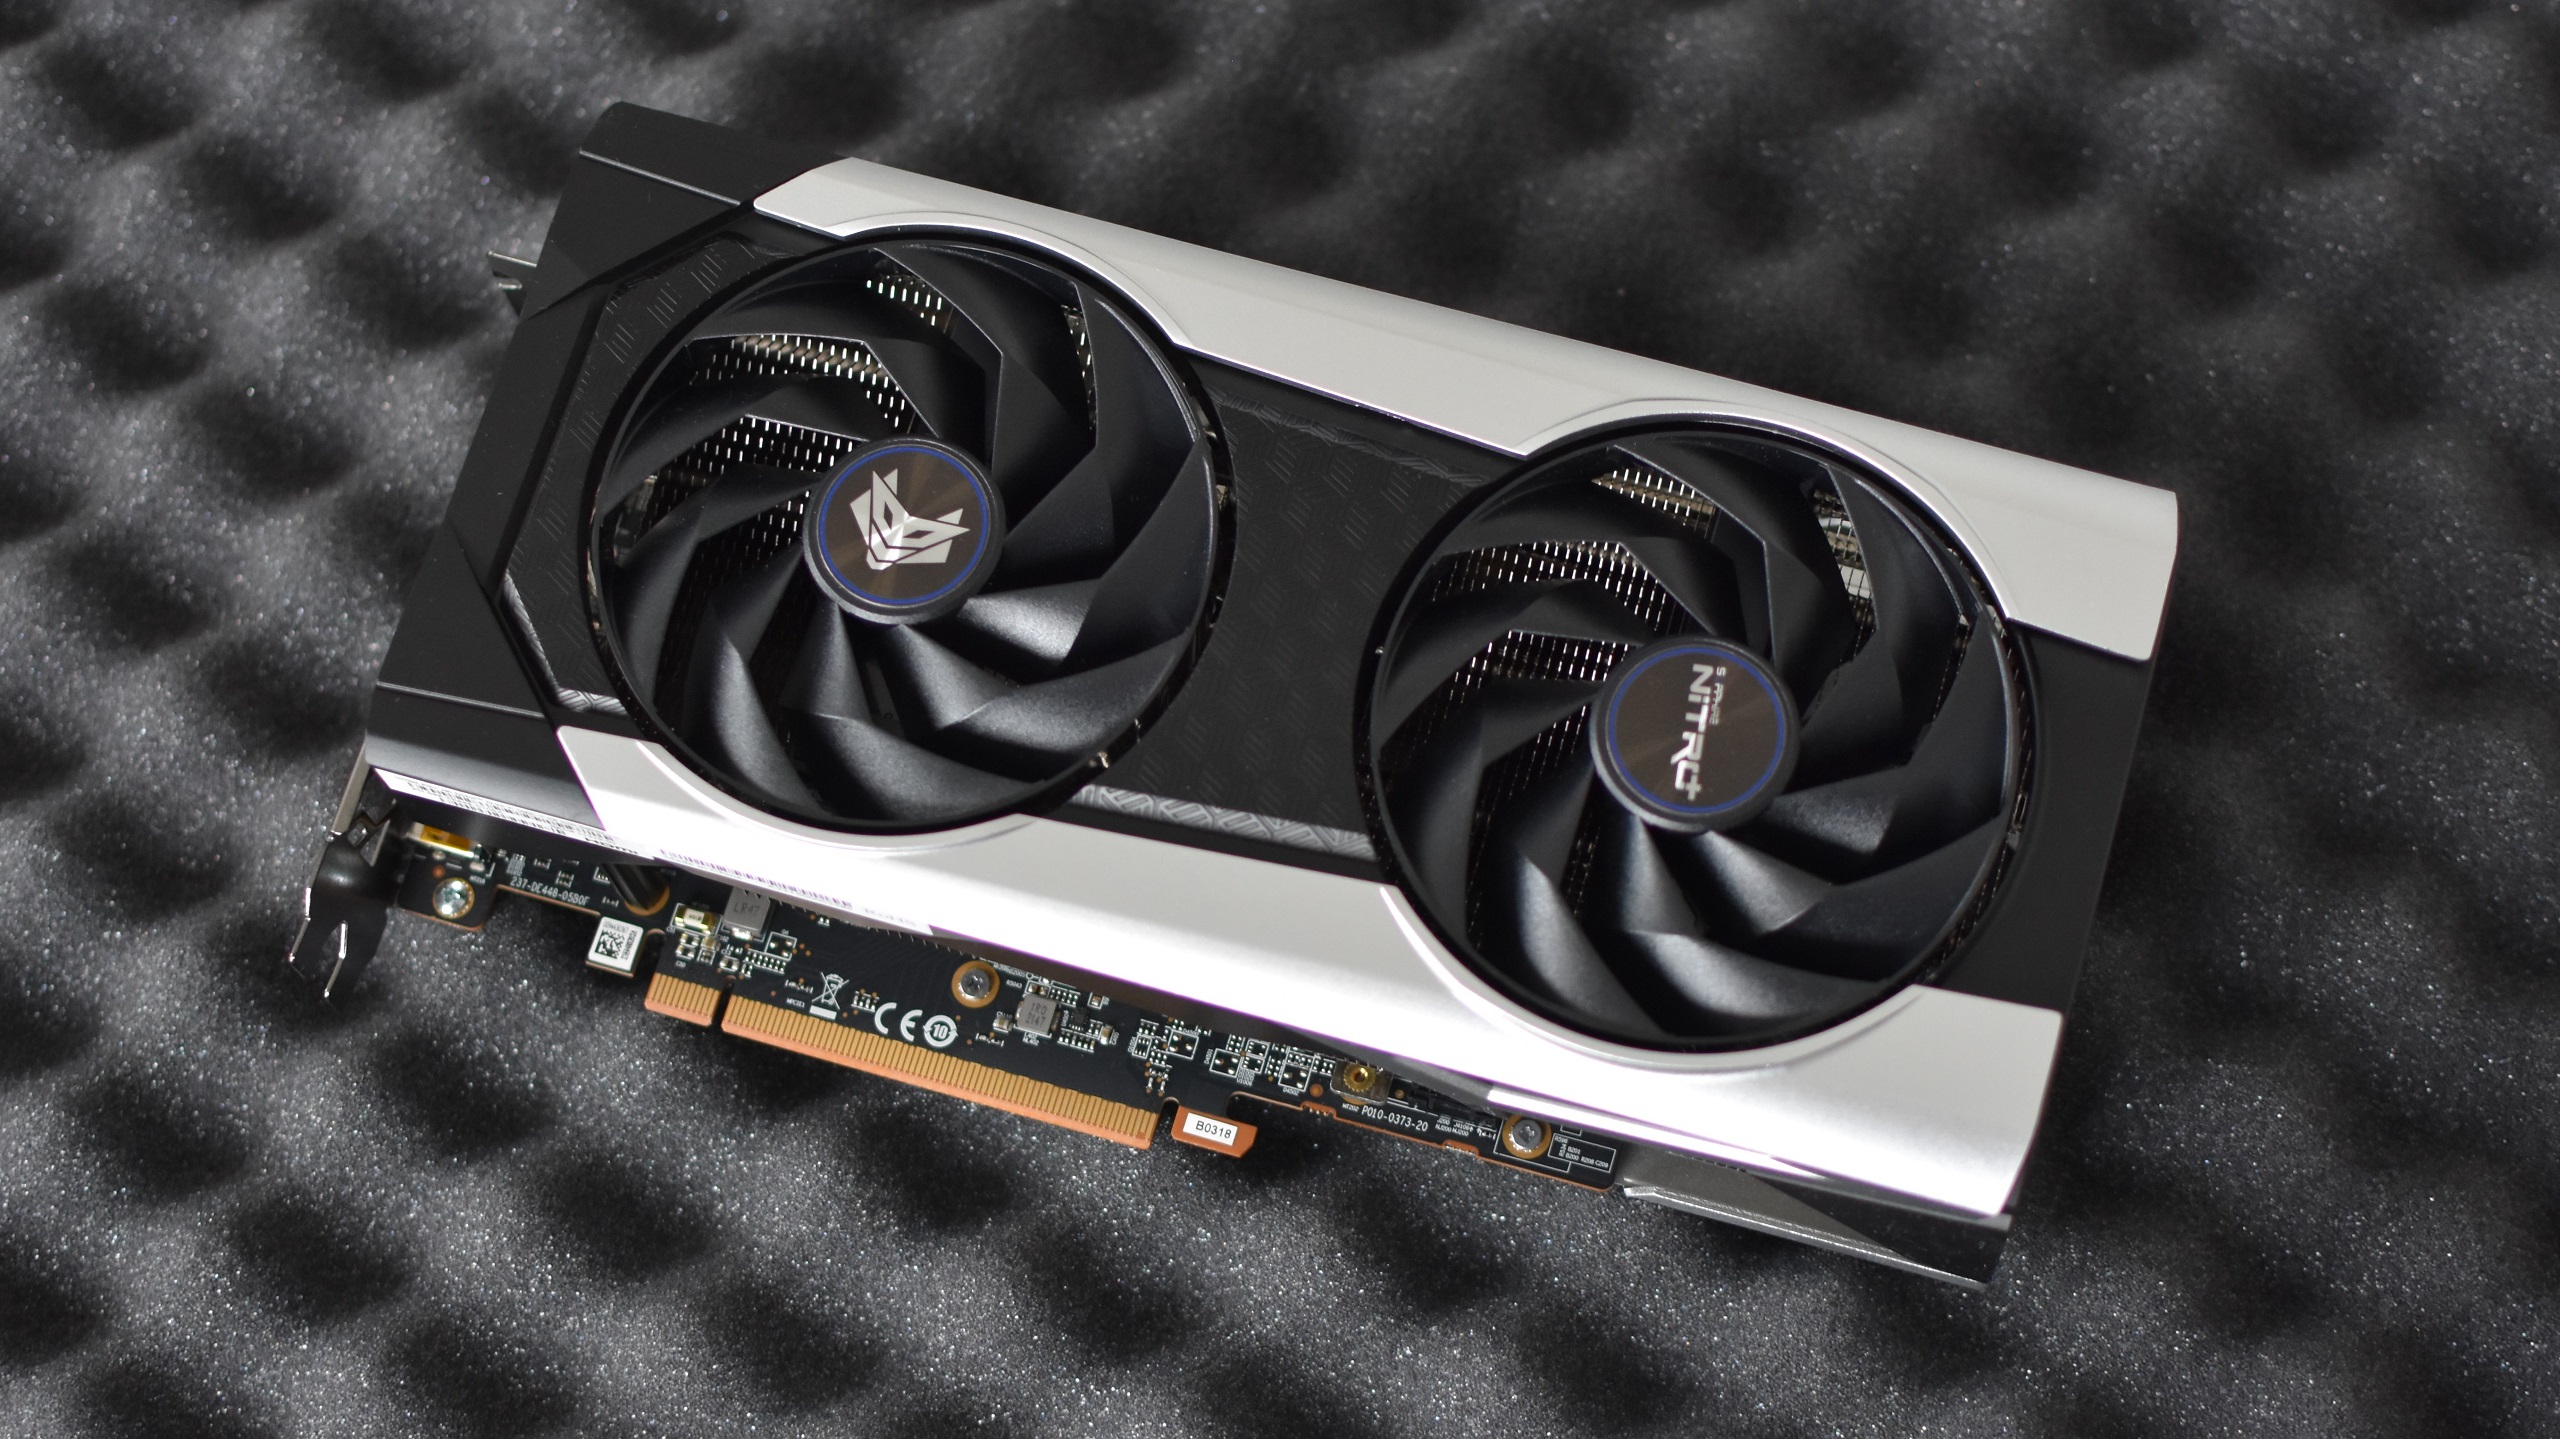 The Sapphire Nitro+ Radeon RX 6650 XT graphics card, cooler-side up.